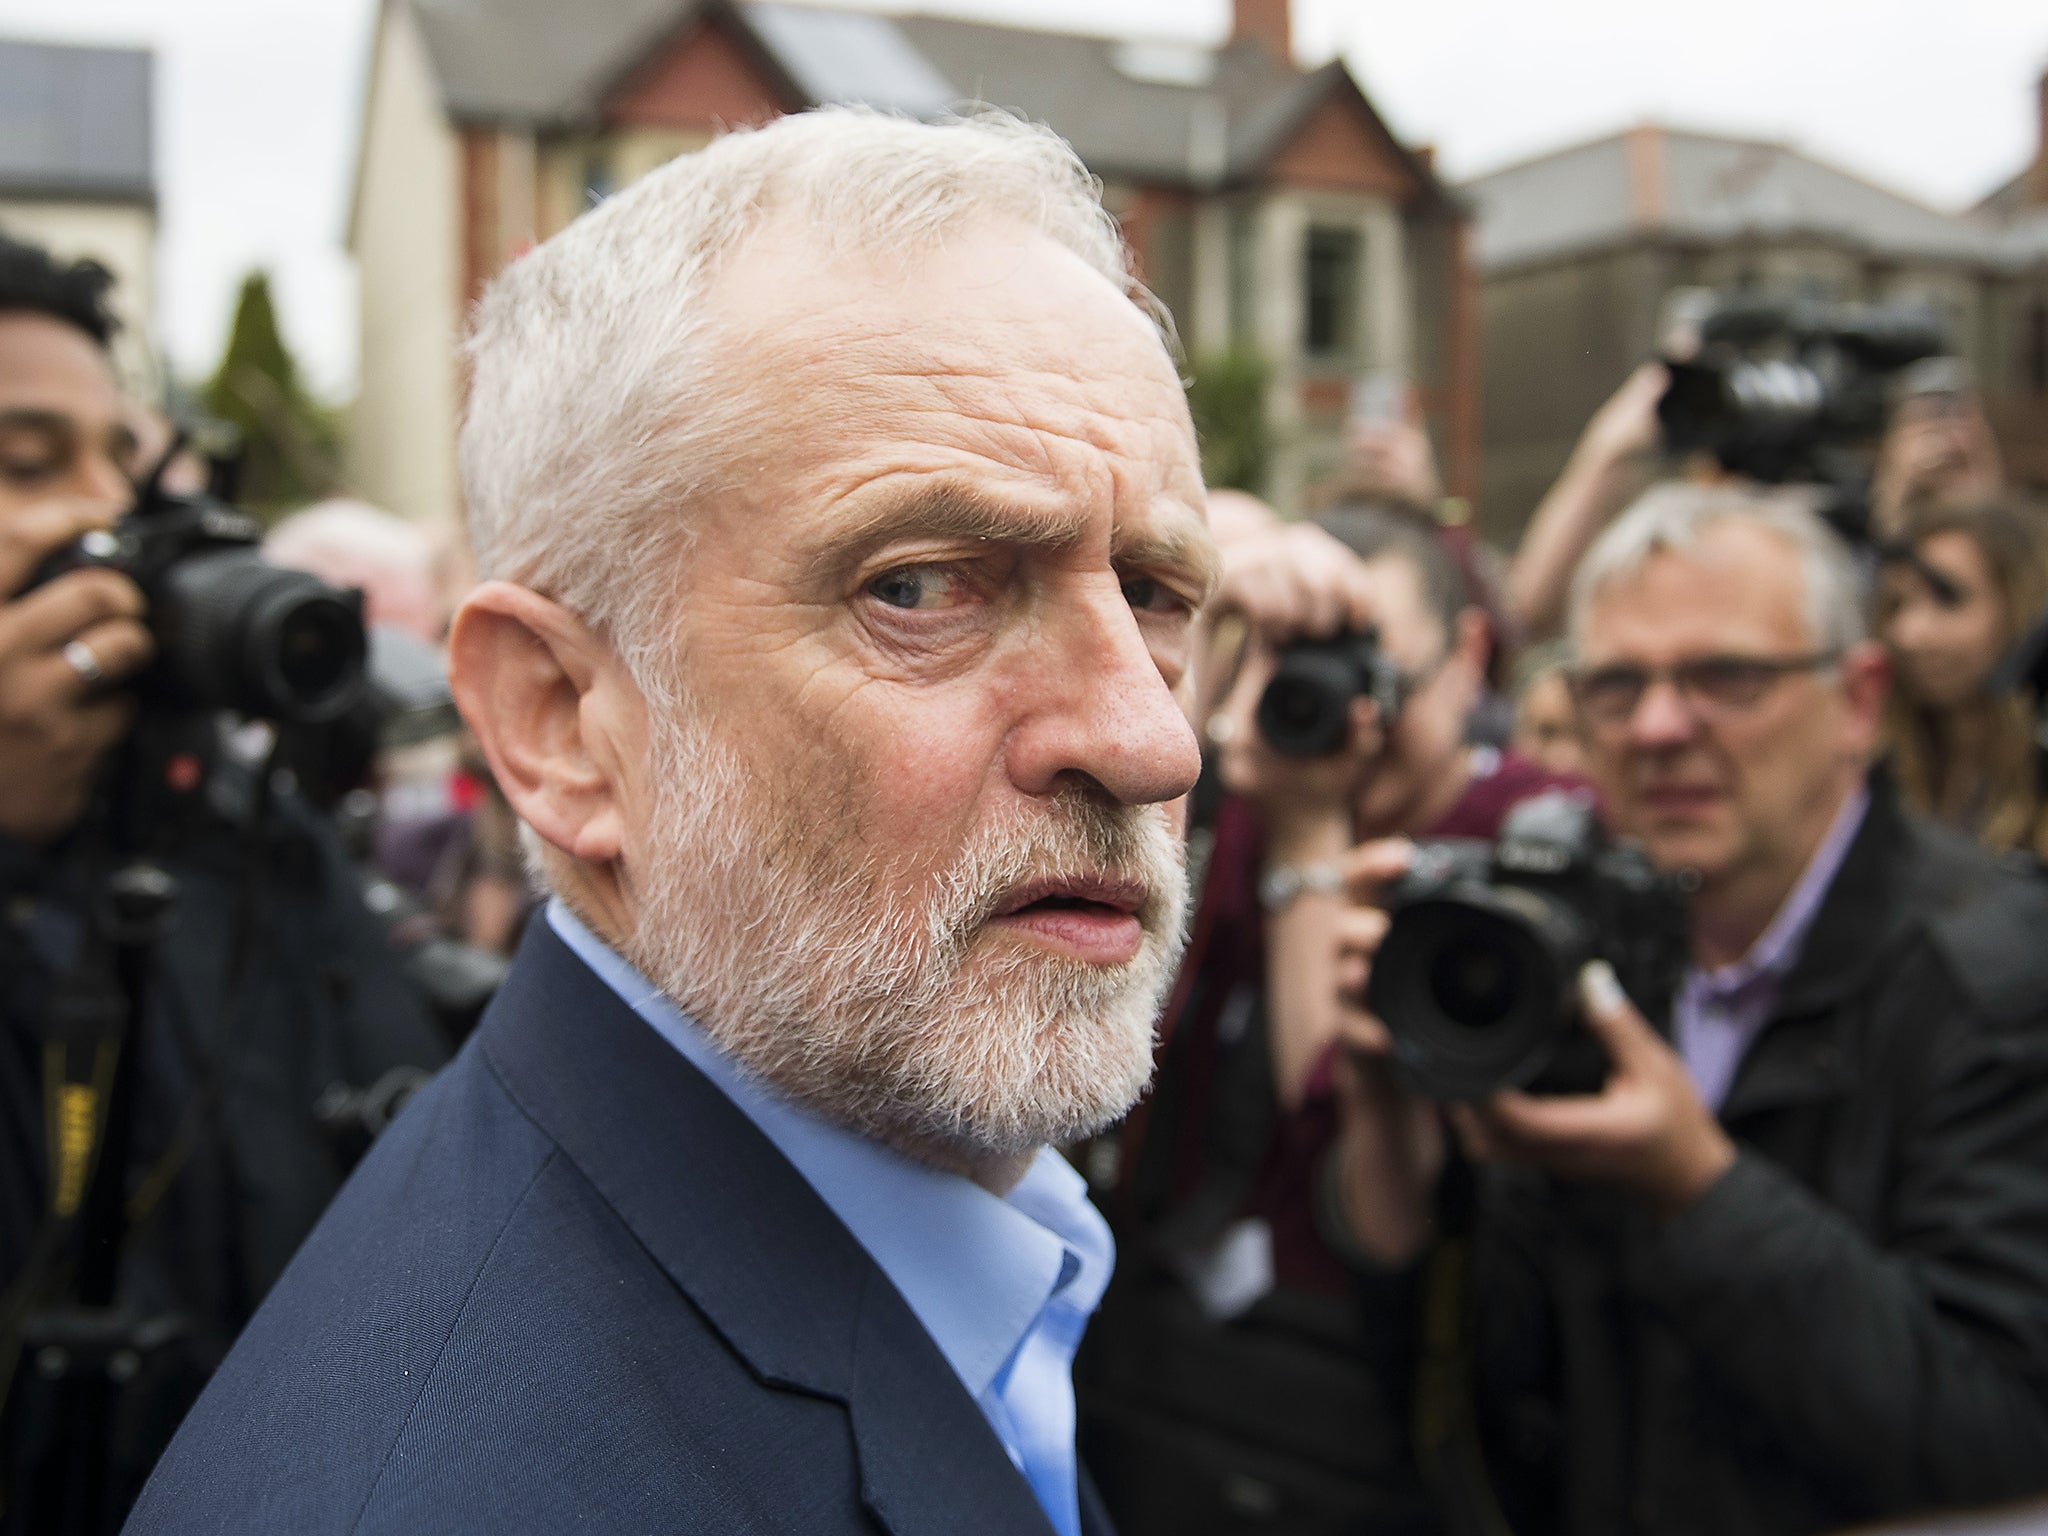 Mr Corbyn has been accused of not proactively fighting the perception of anti-Semitism